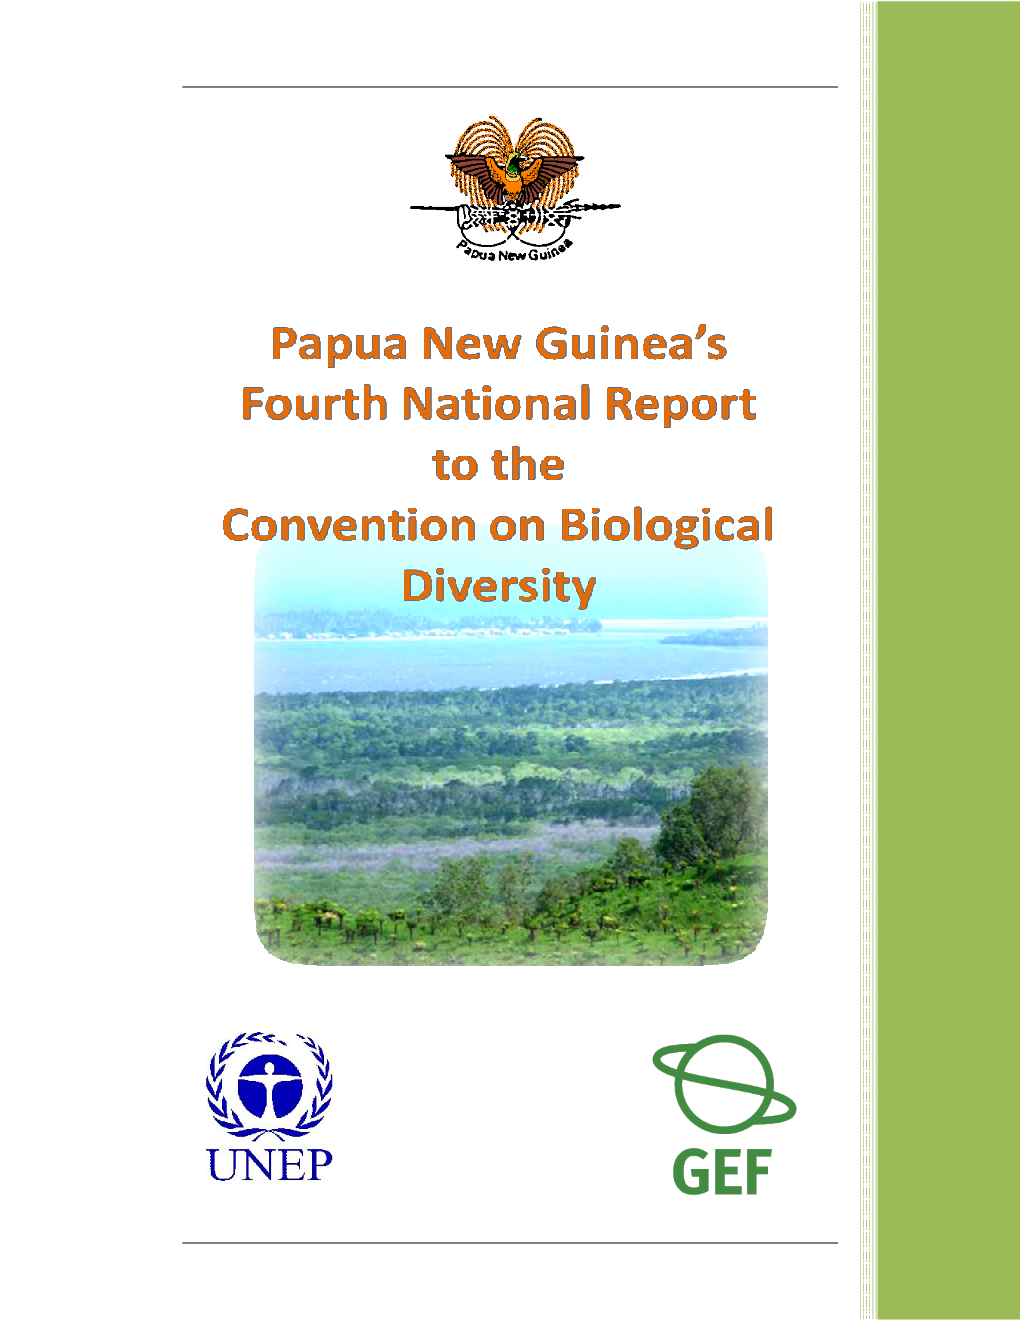 Papua New Guinea’S Fourth National Report to the Convention on Biological Diversity